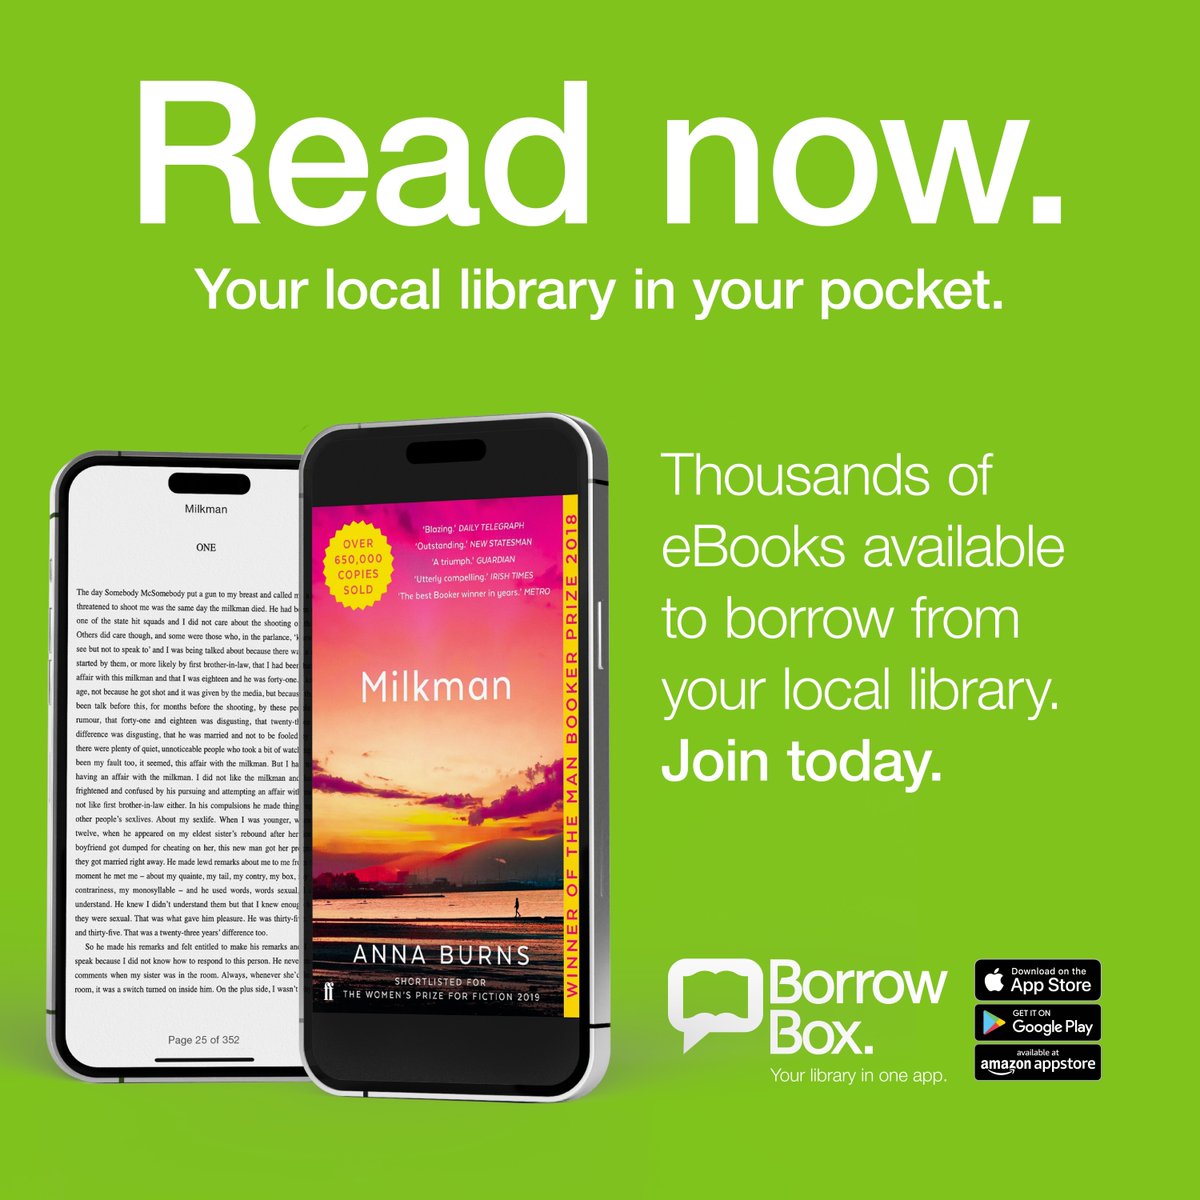 Borrow eBooks &eAudiobooks for FREE from #BorrowBox! You just need your library card and pin to sign up. Available as Unlimited title from 29th April for 60 days - no queue: 📌 Anna Burns: Milkman